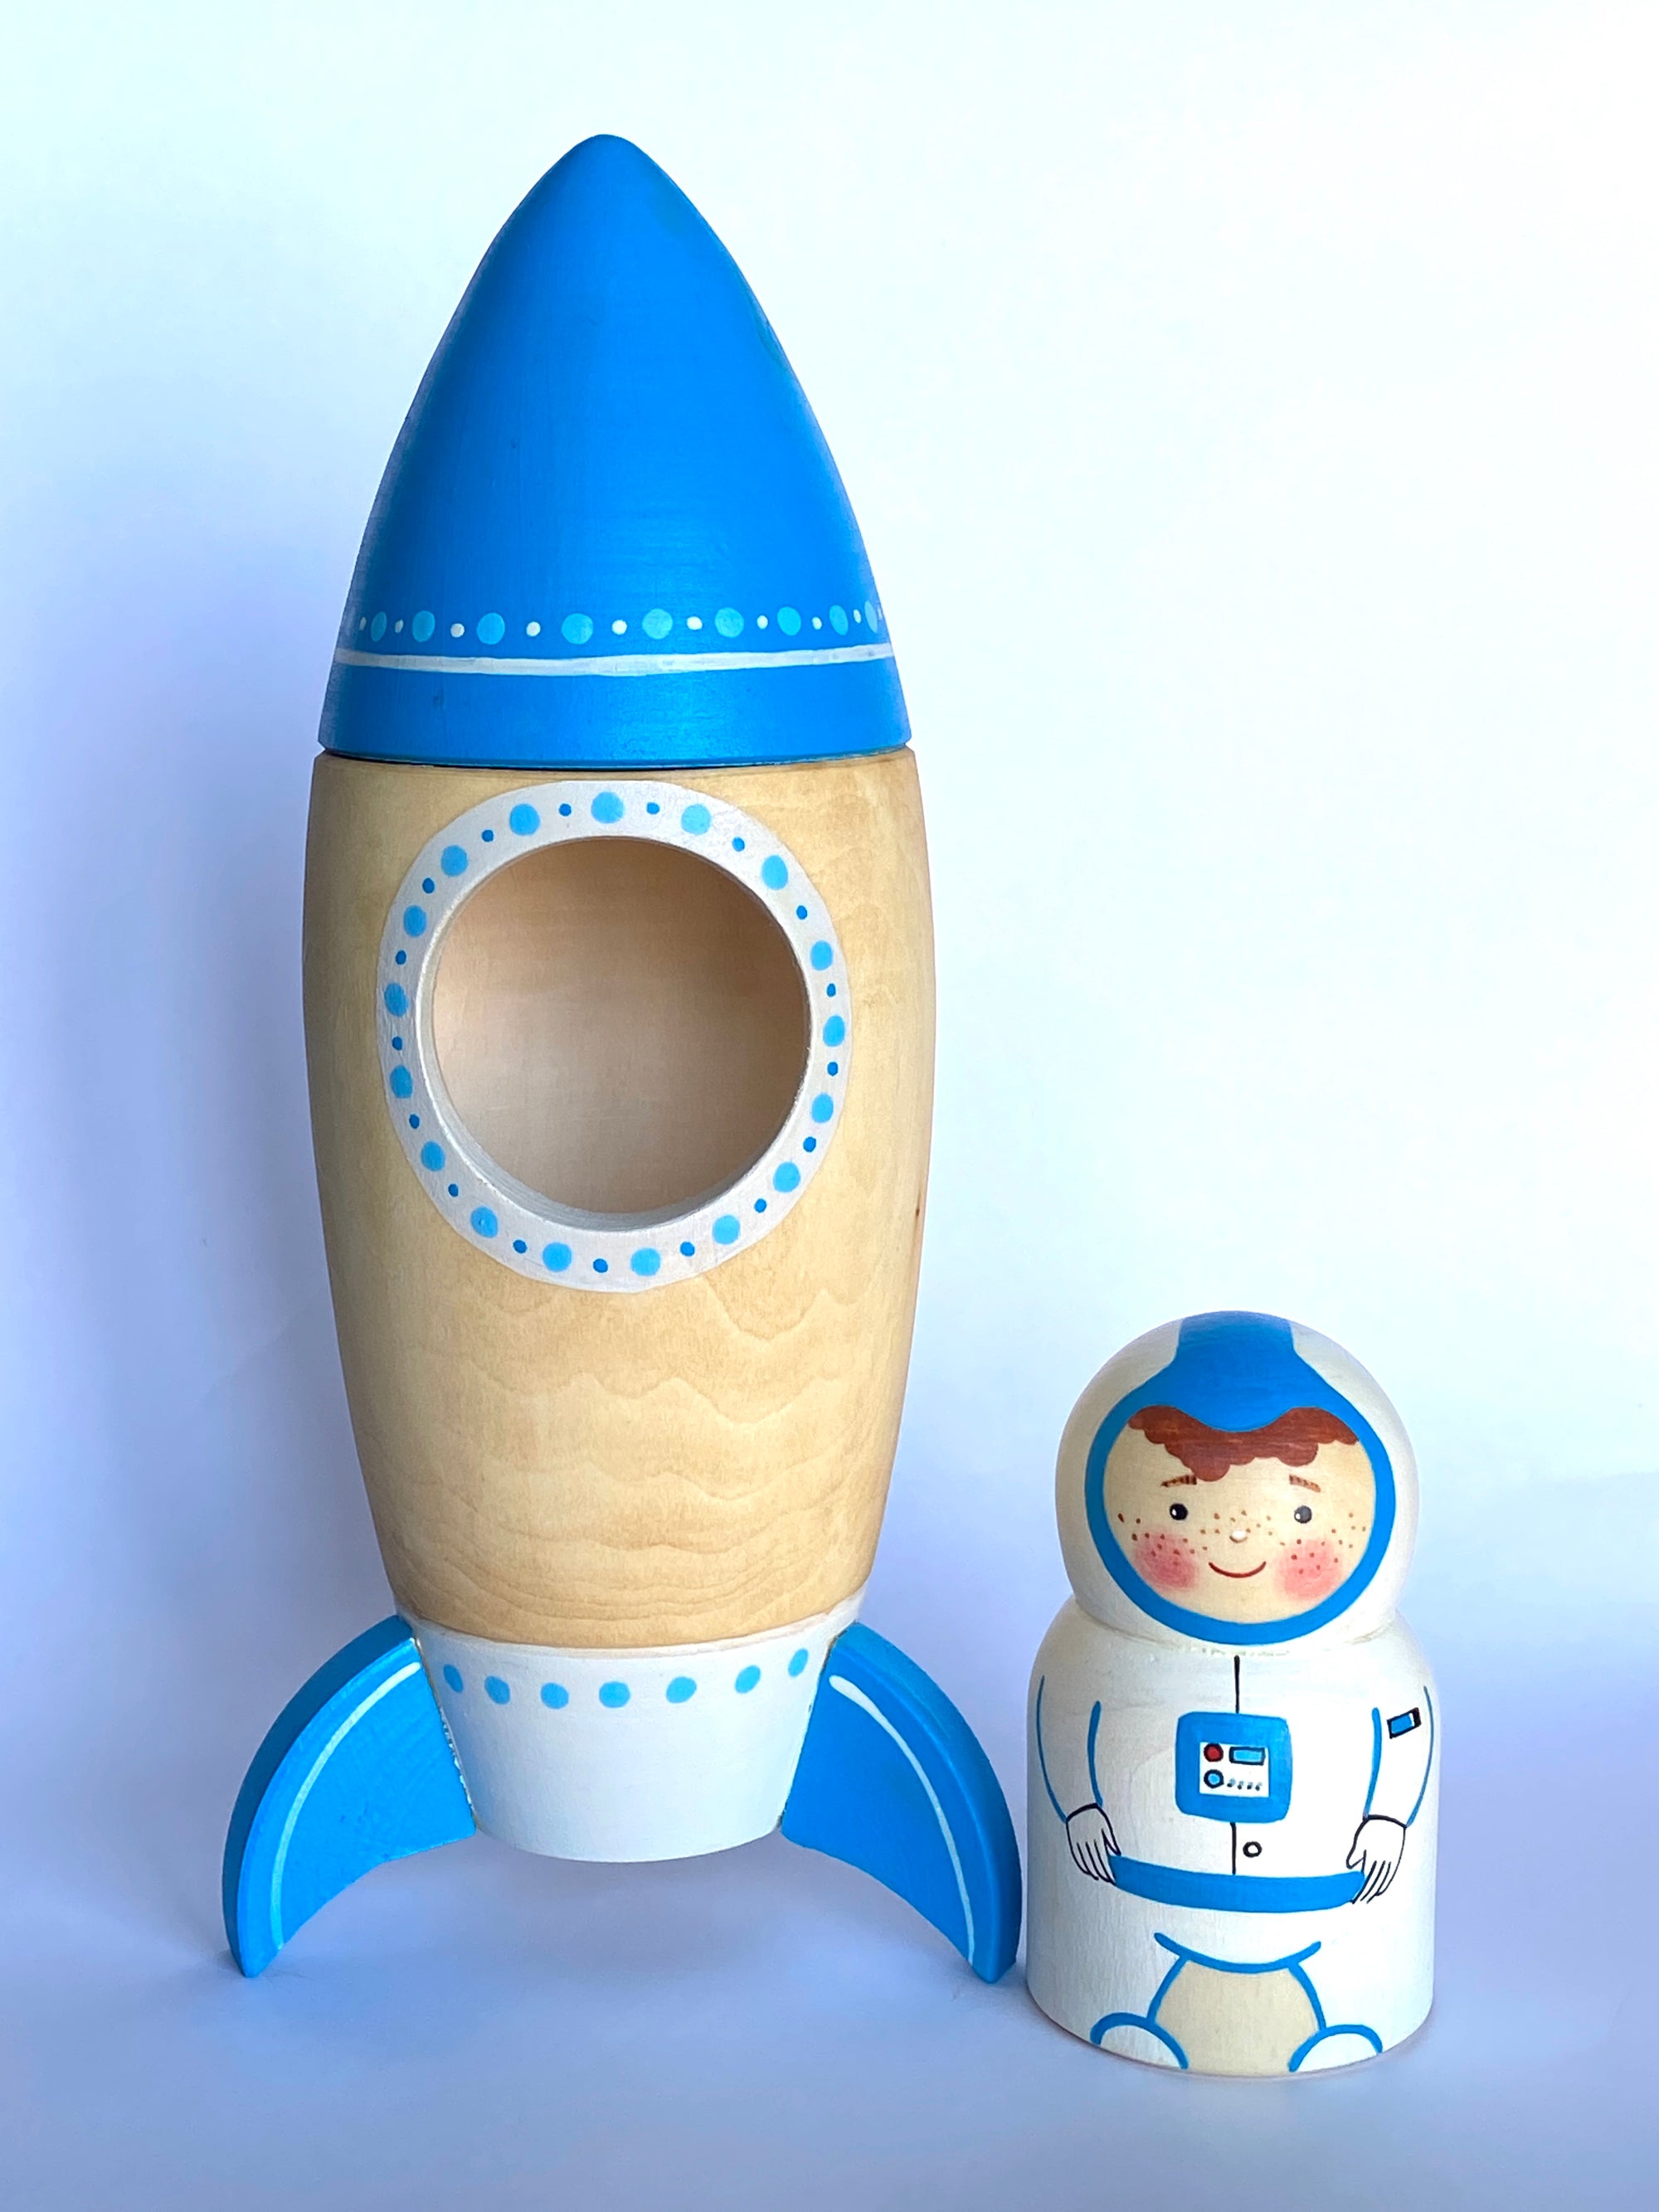 Wooden Toy Rocket with Astronaut